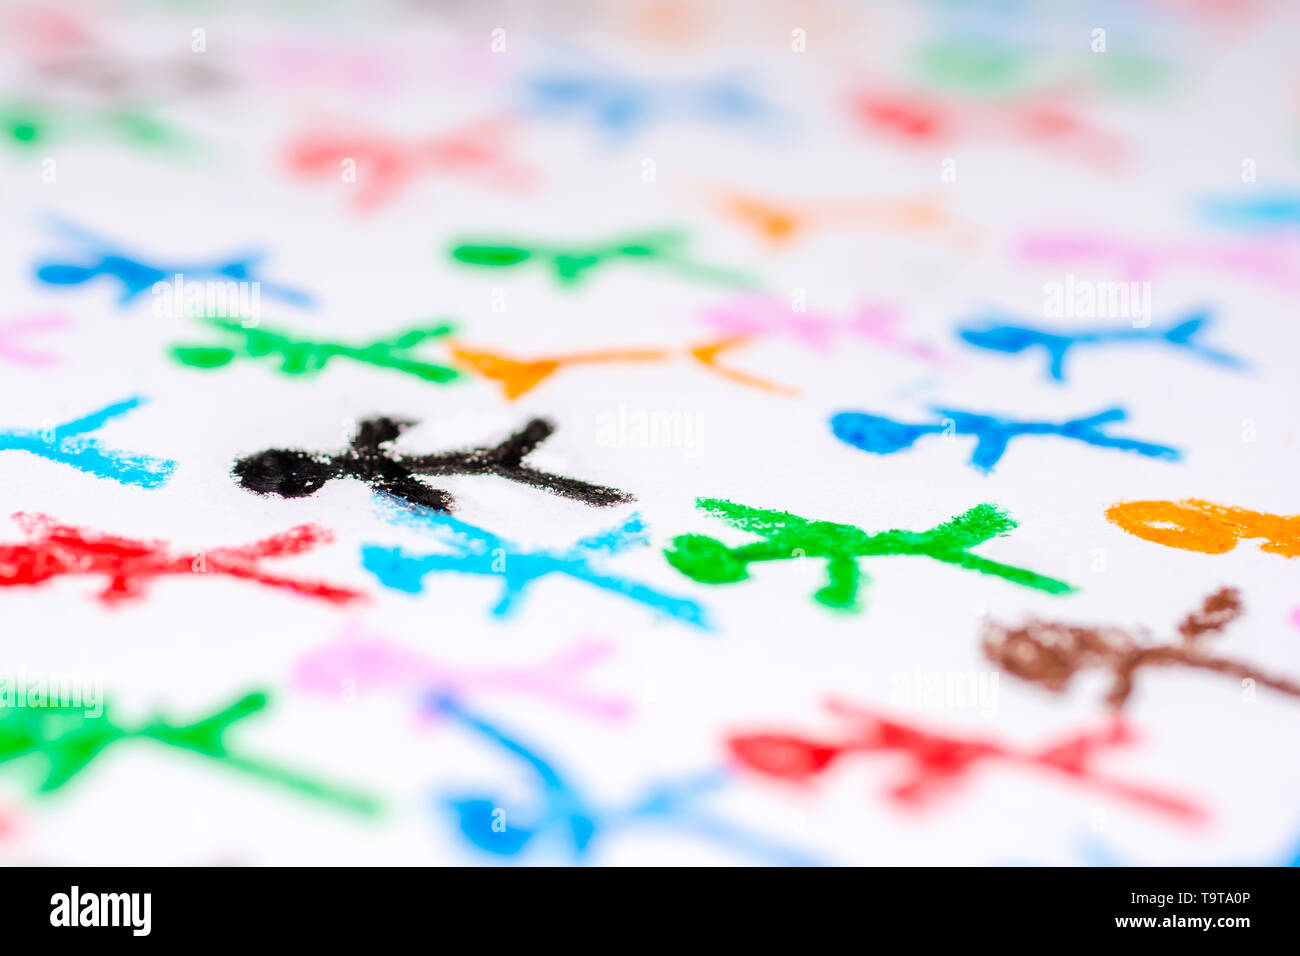 Colored texture of stick figures Stock Photo